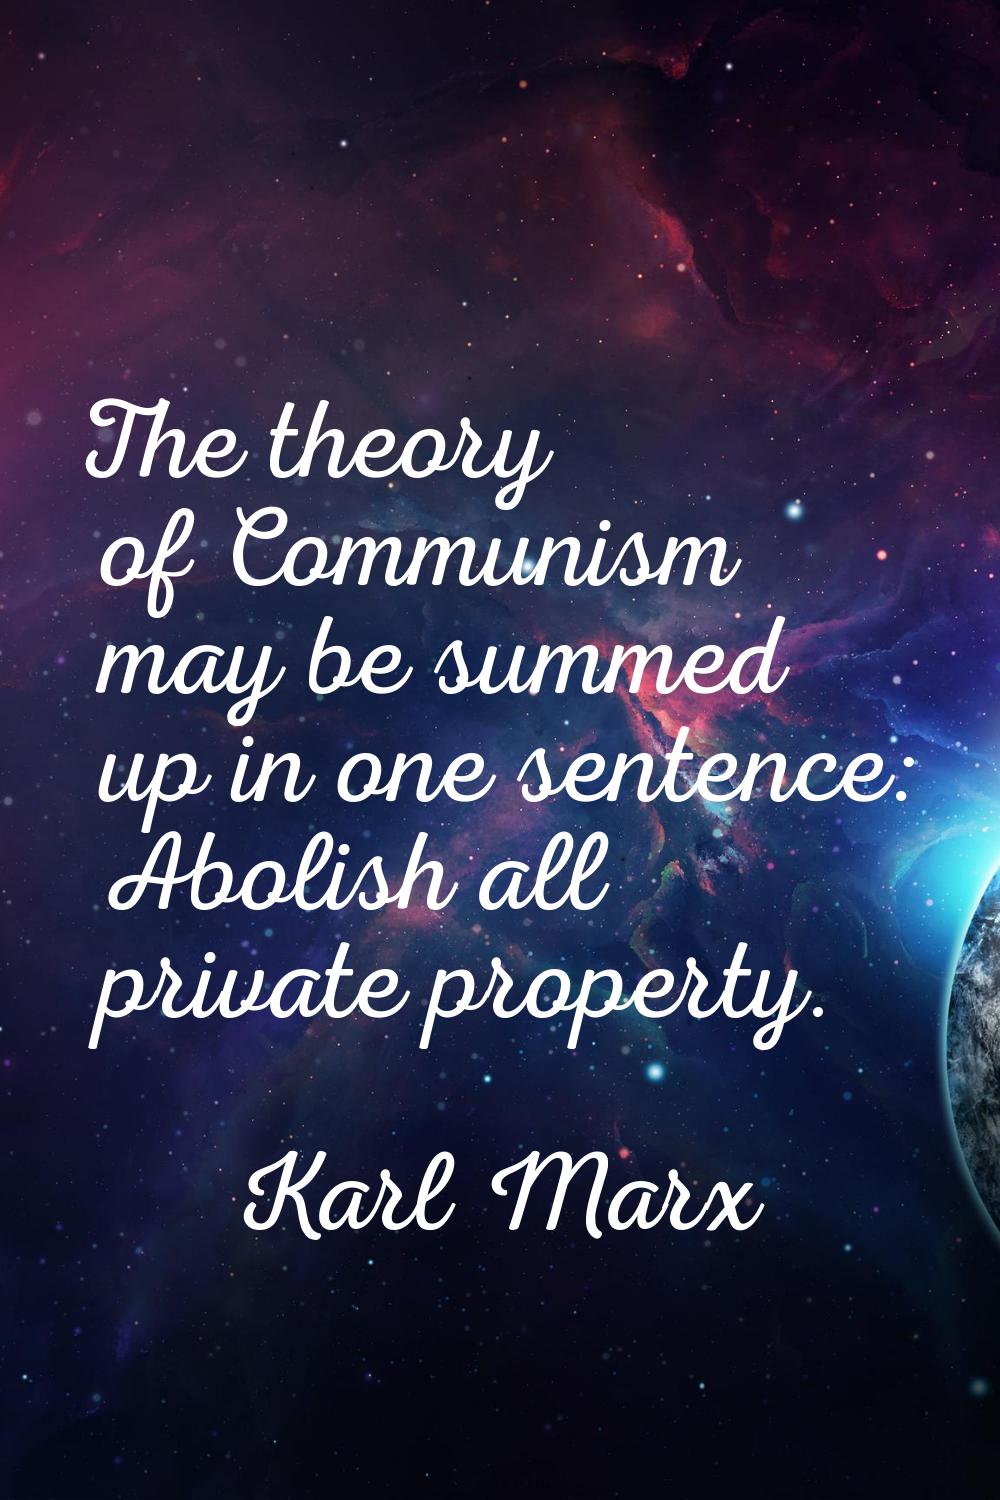 The theory of Communism may be summed up in one sentence: Abolish all private property.